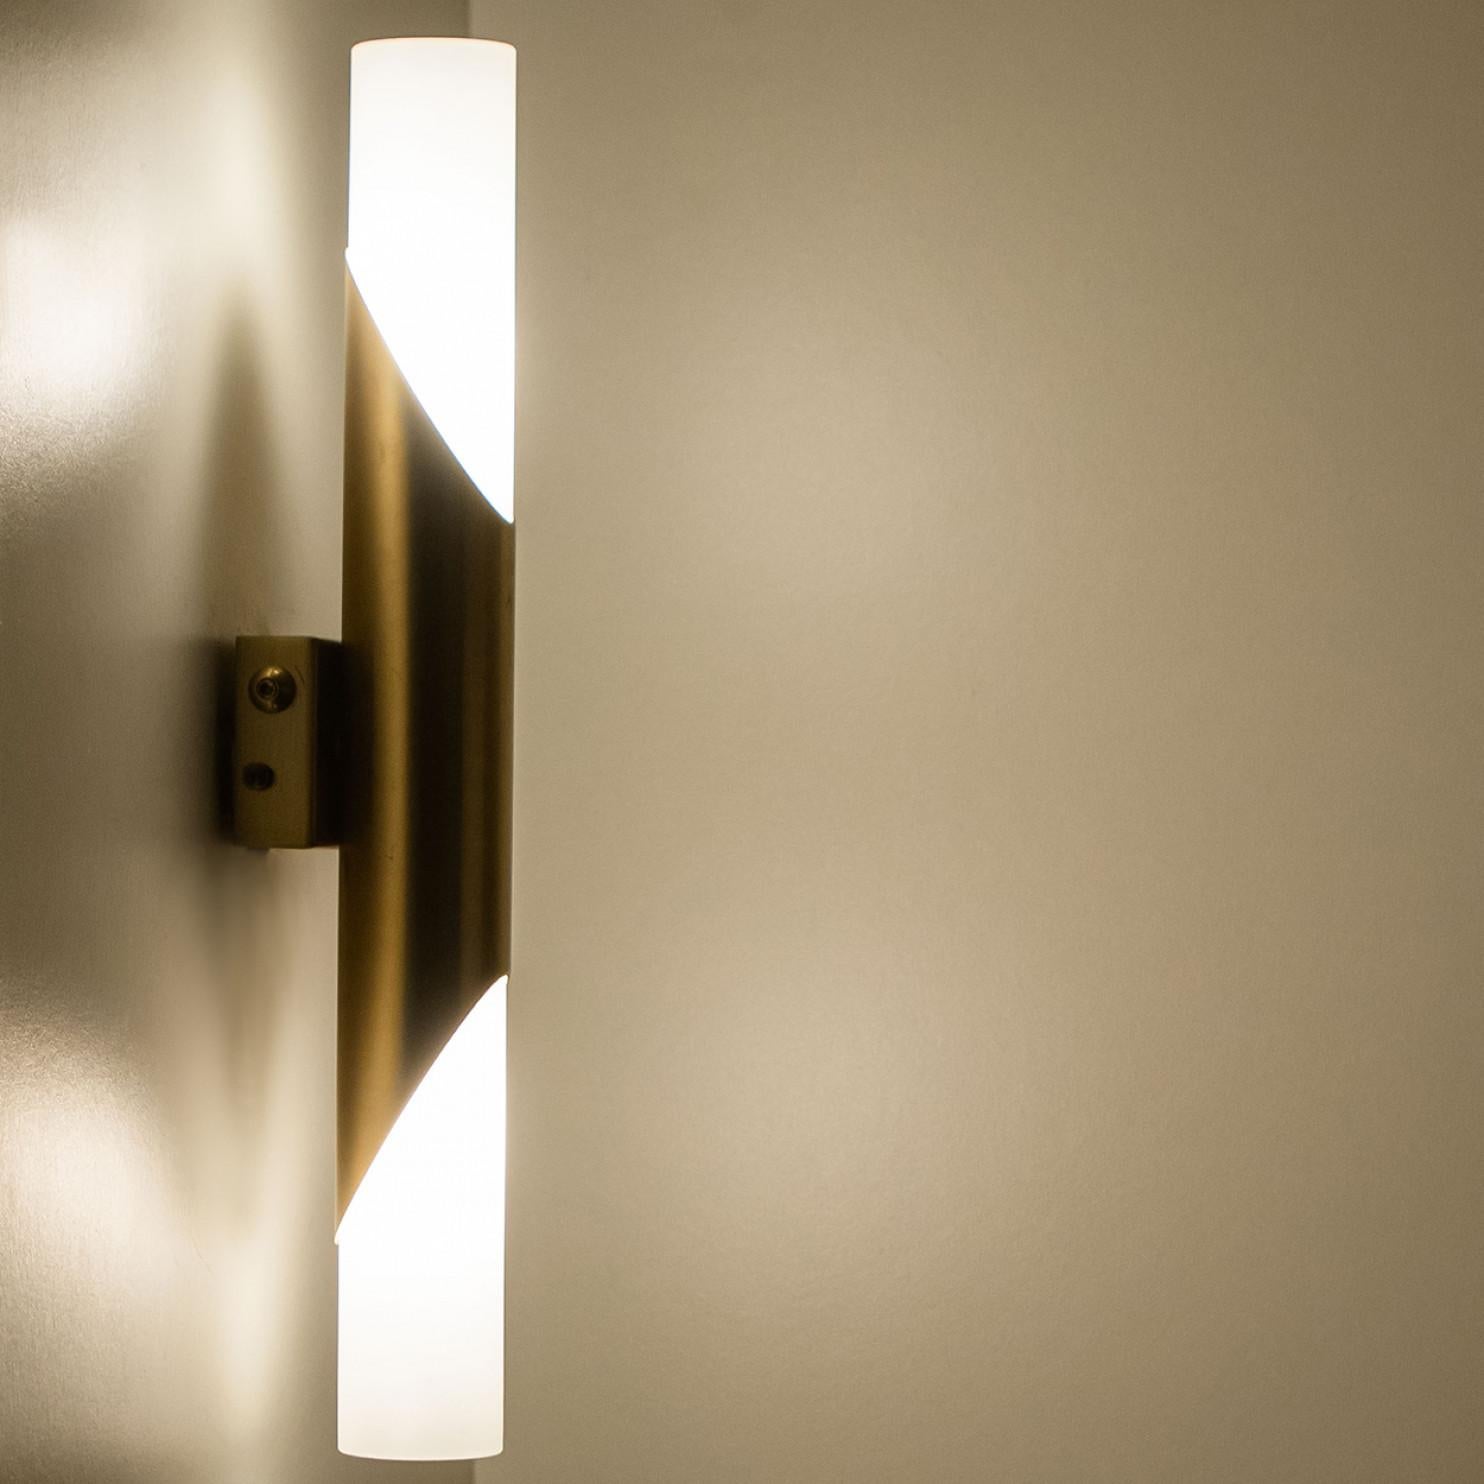 A minimalistic designed wall sconce, designed in Germany around 1970.
Each lamp is made of white milk glass with two bulb sockets on each end on a warm brass base.

Please note: the price is for the pair.

Dimensions:
Height: 15.74